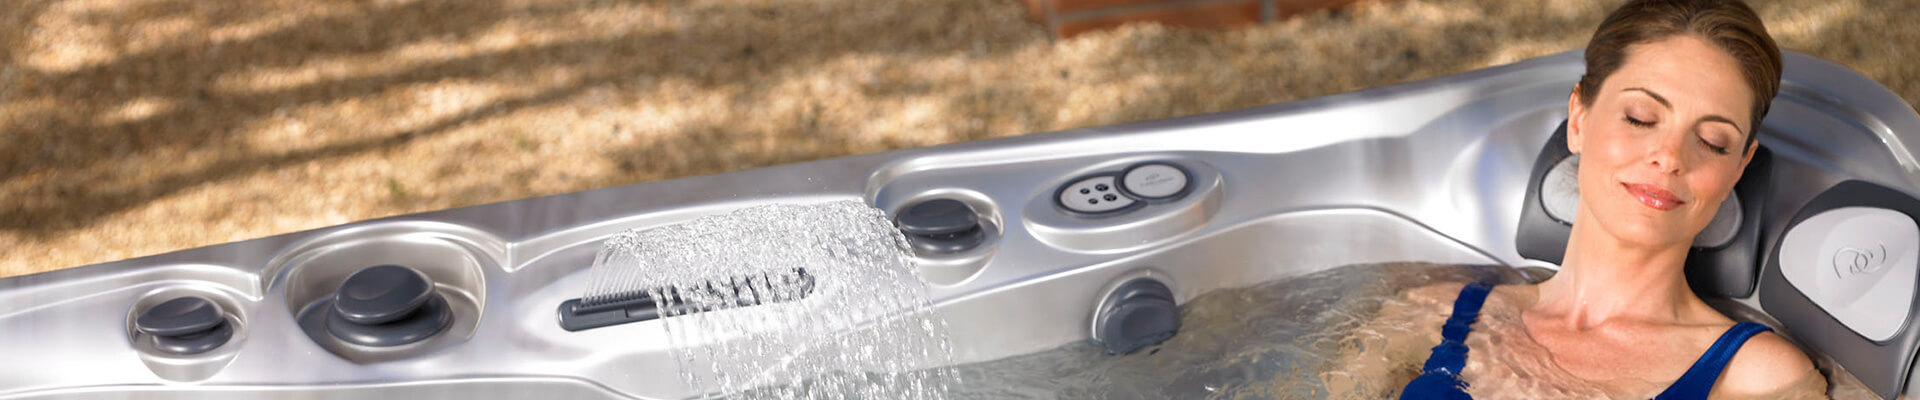 Easy Pain Relief with a Soak in the Family Spa, Hot Tubs for Sale Hillsboro